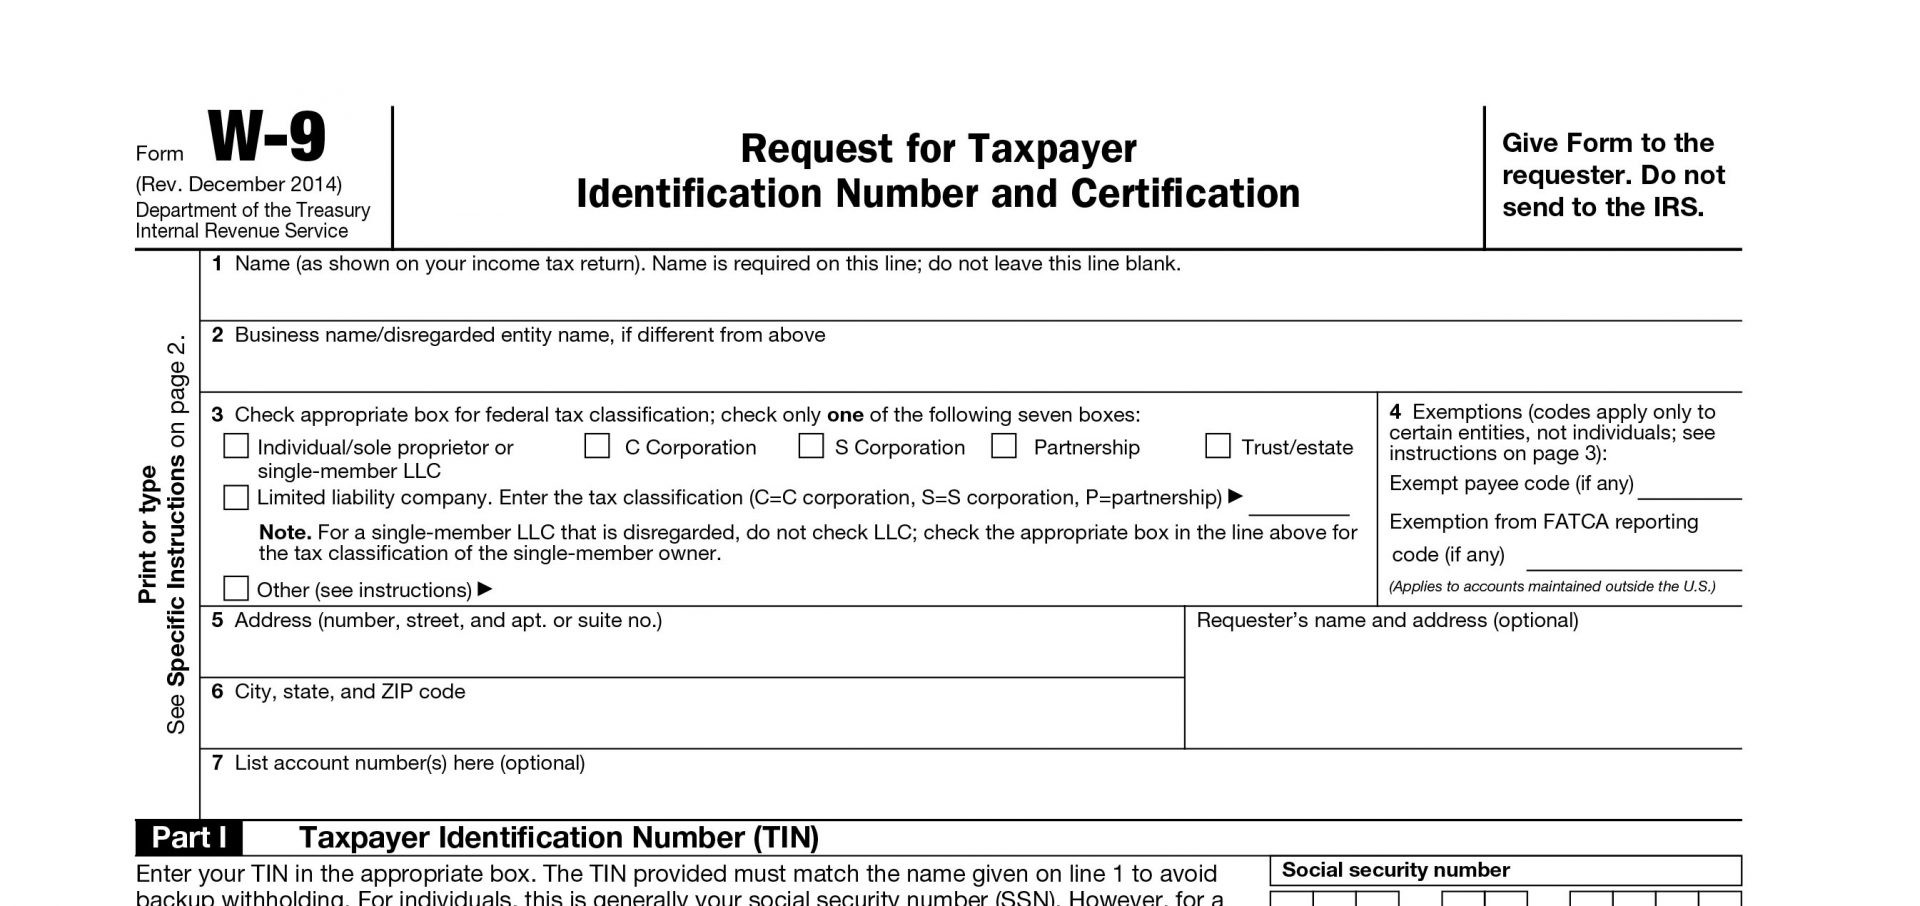 Printable Irs W-9 Blank 2019 For Free Use-Order Blank W-9 Forms